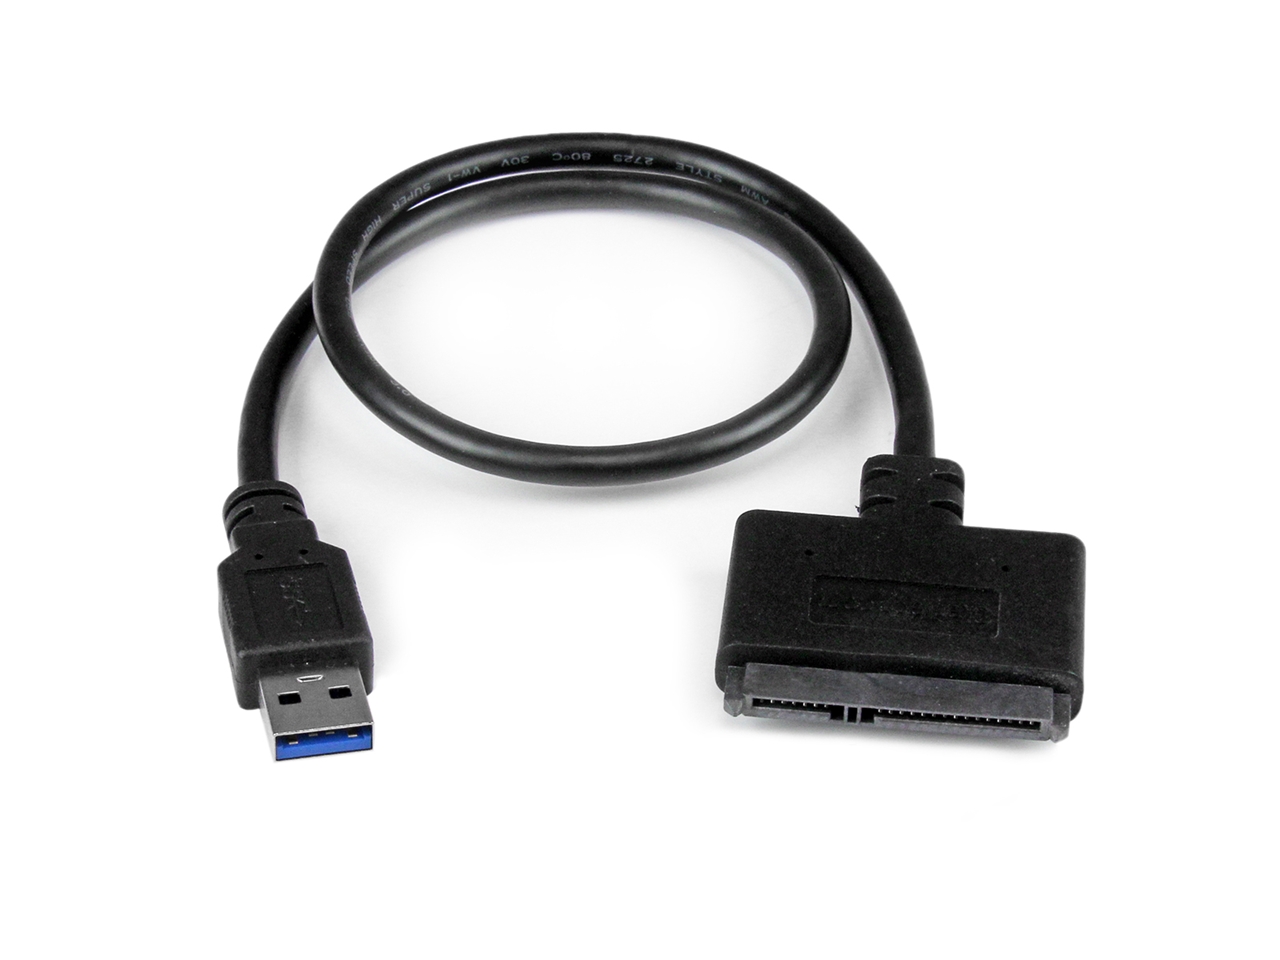 EDT-USB 3.0 to 2.5 SATA III Hard Drive Adapter Cable/UASP SATA to USB 3.0 Converter for SSD/HDD Hard Drive Adapter Cable